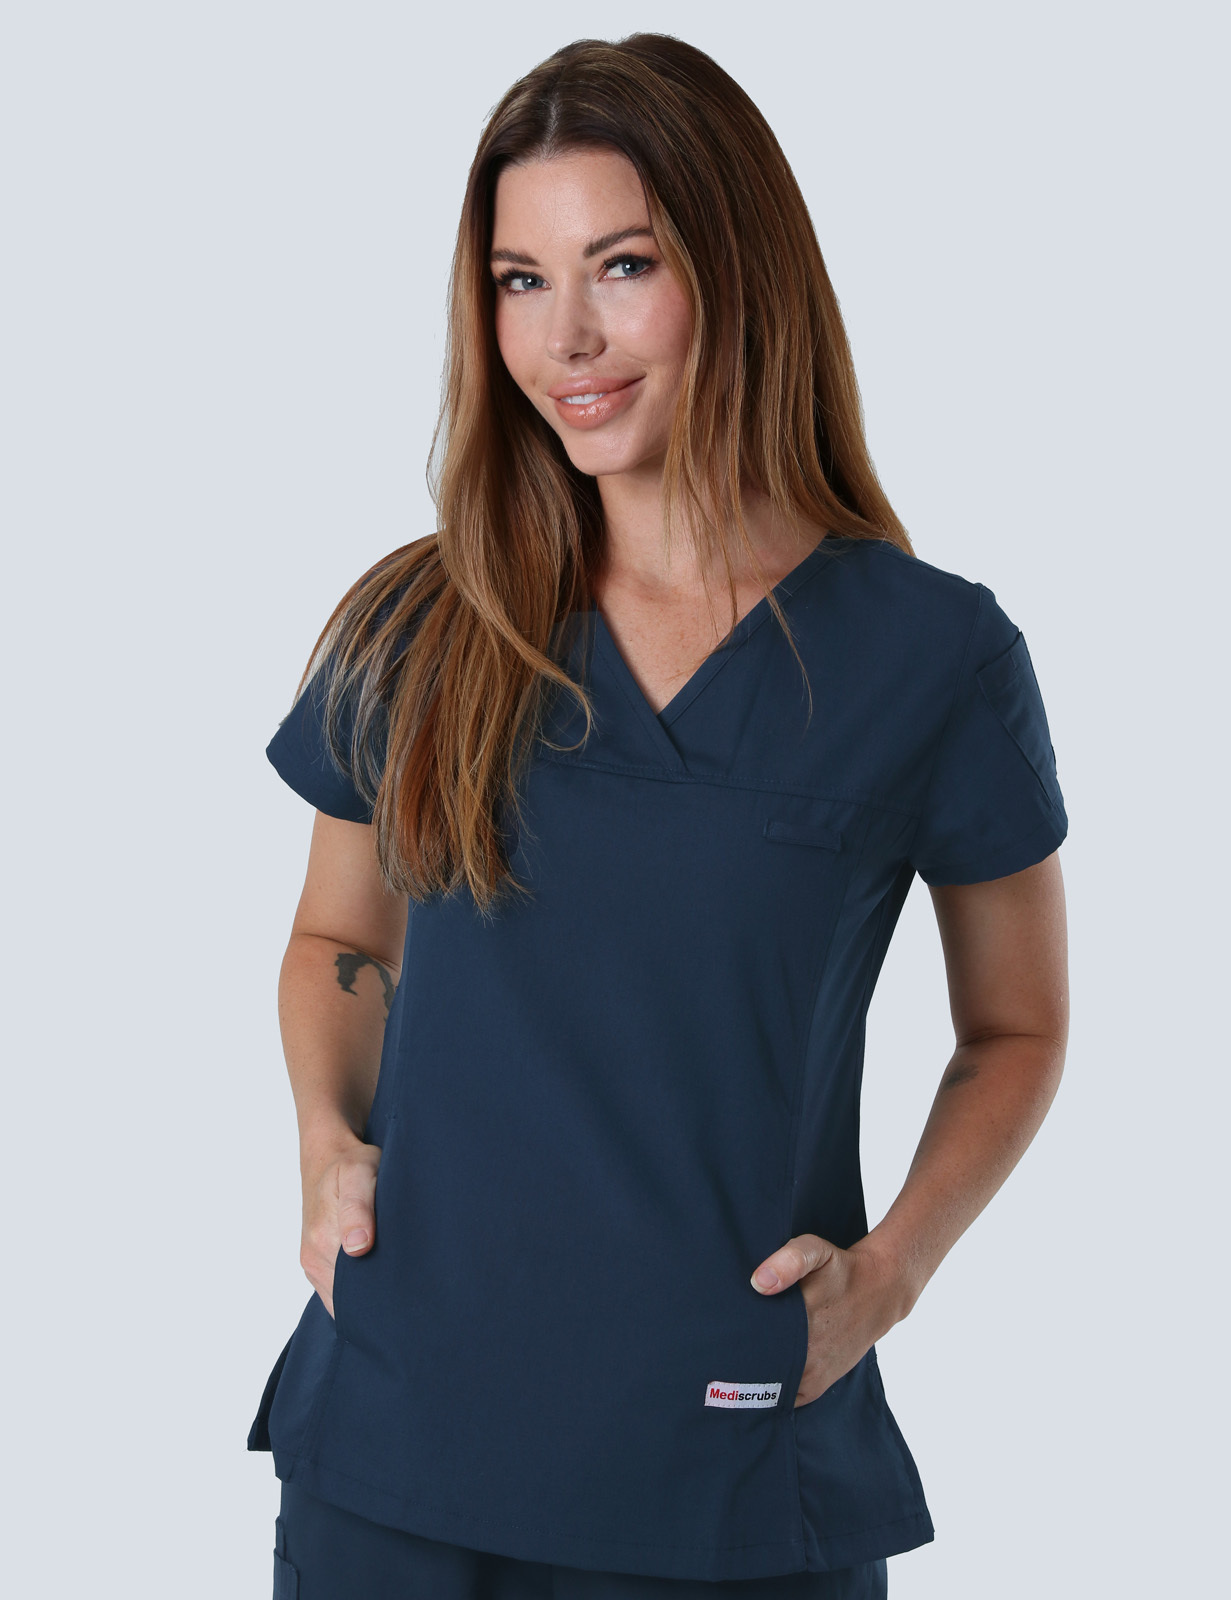 Weipa Hospital - ED EEN (Women's Fit Solid Scrub Top and Cargo Pants in Navy incl Logos)